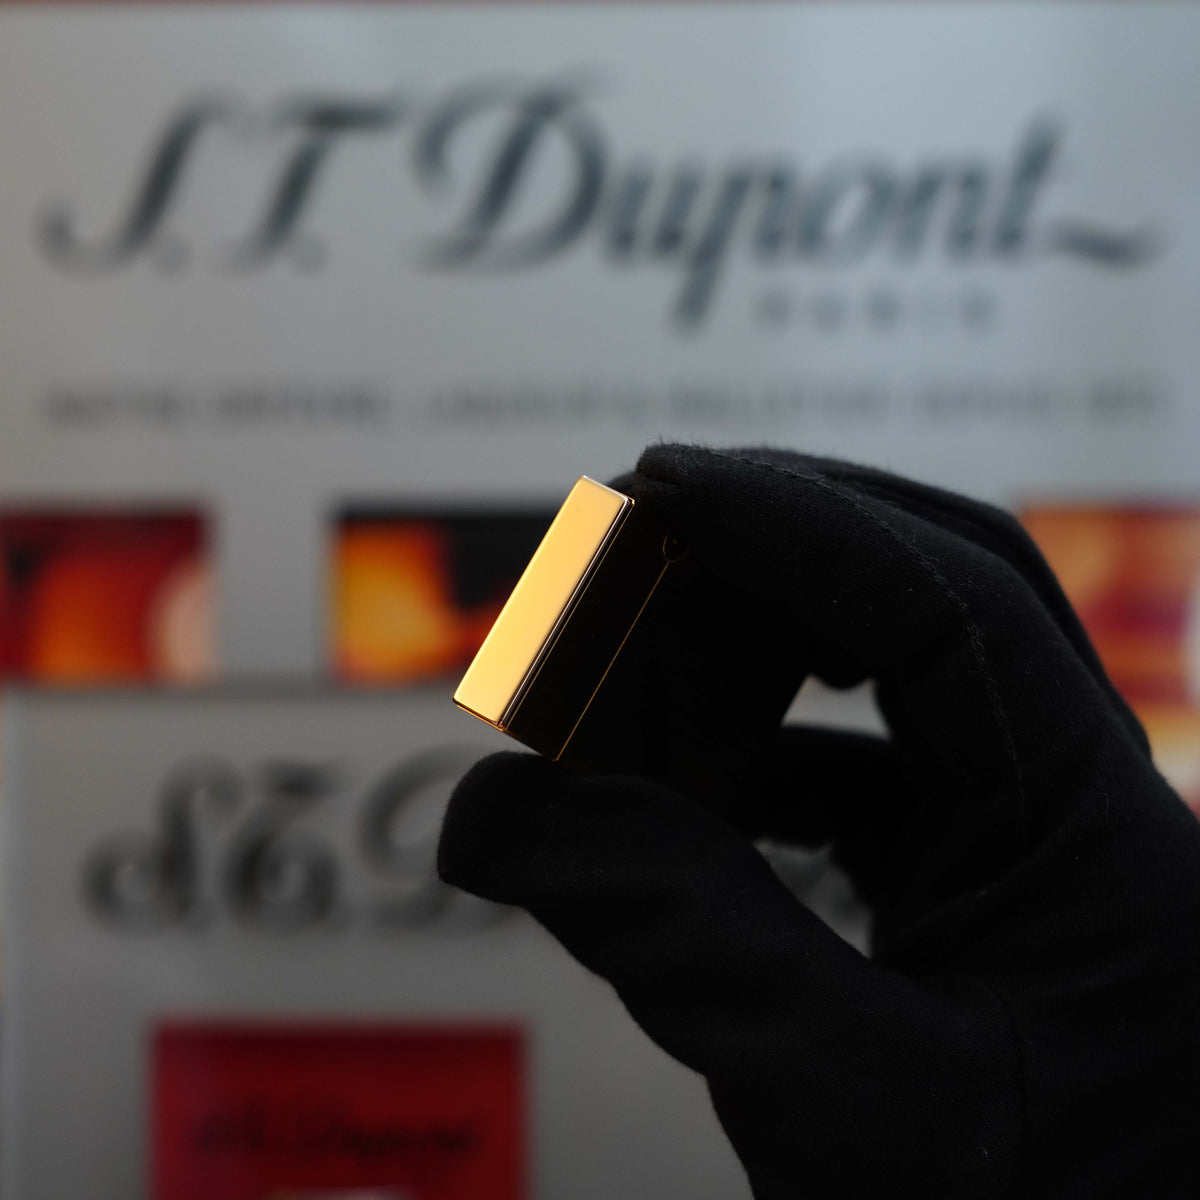 A gloved hand holds a small, gold-colored rectangular object from the Vintage 1980 St Dupont Gold brushed finish Medium Ligne 2 lighter series in front of a blurred background featuring the text "S.T. Dupont," capturing the essence of a true collector's item.